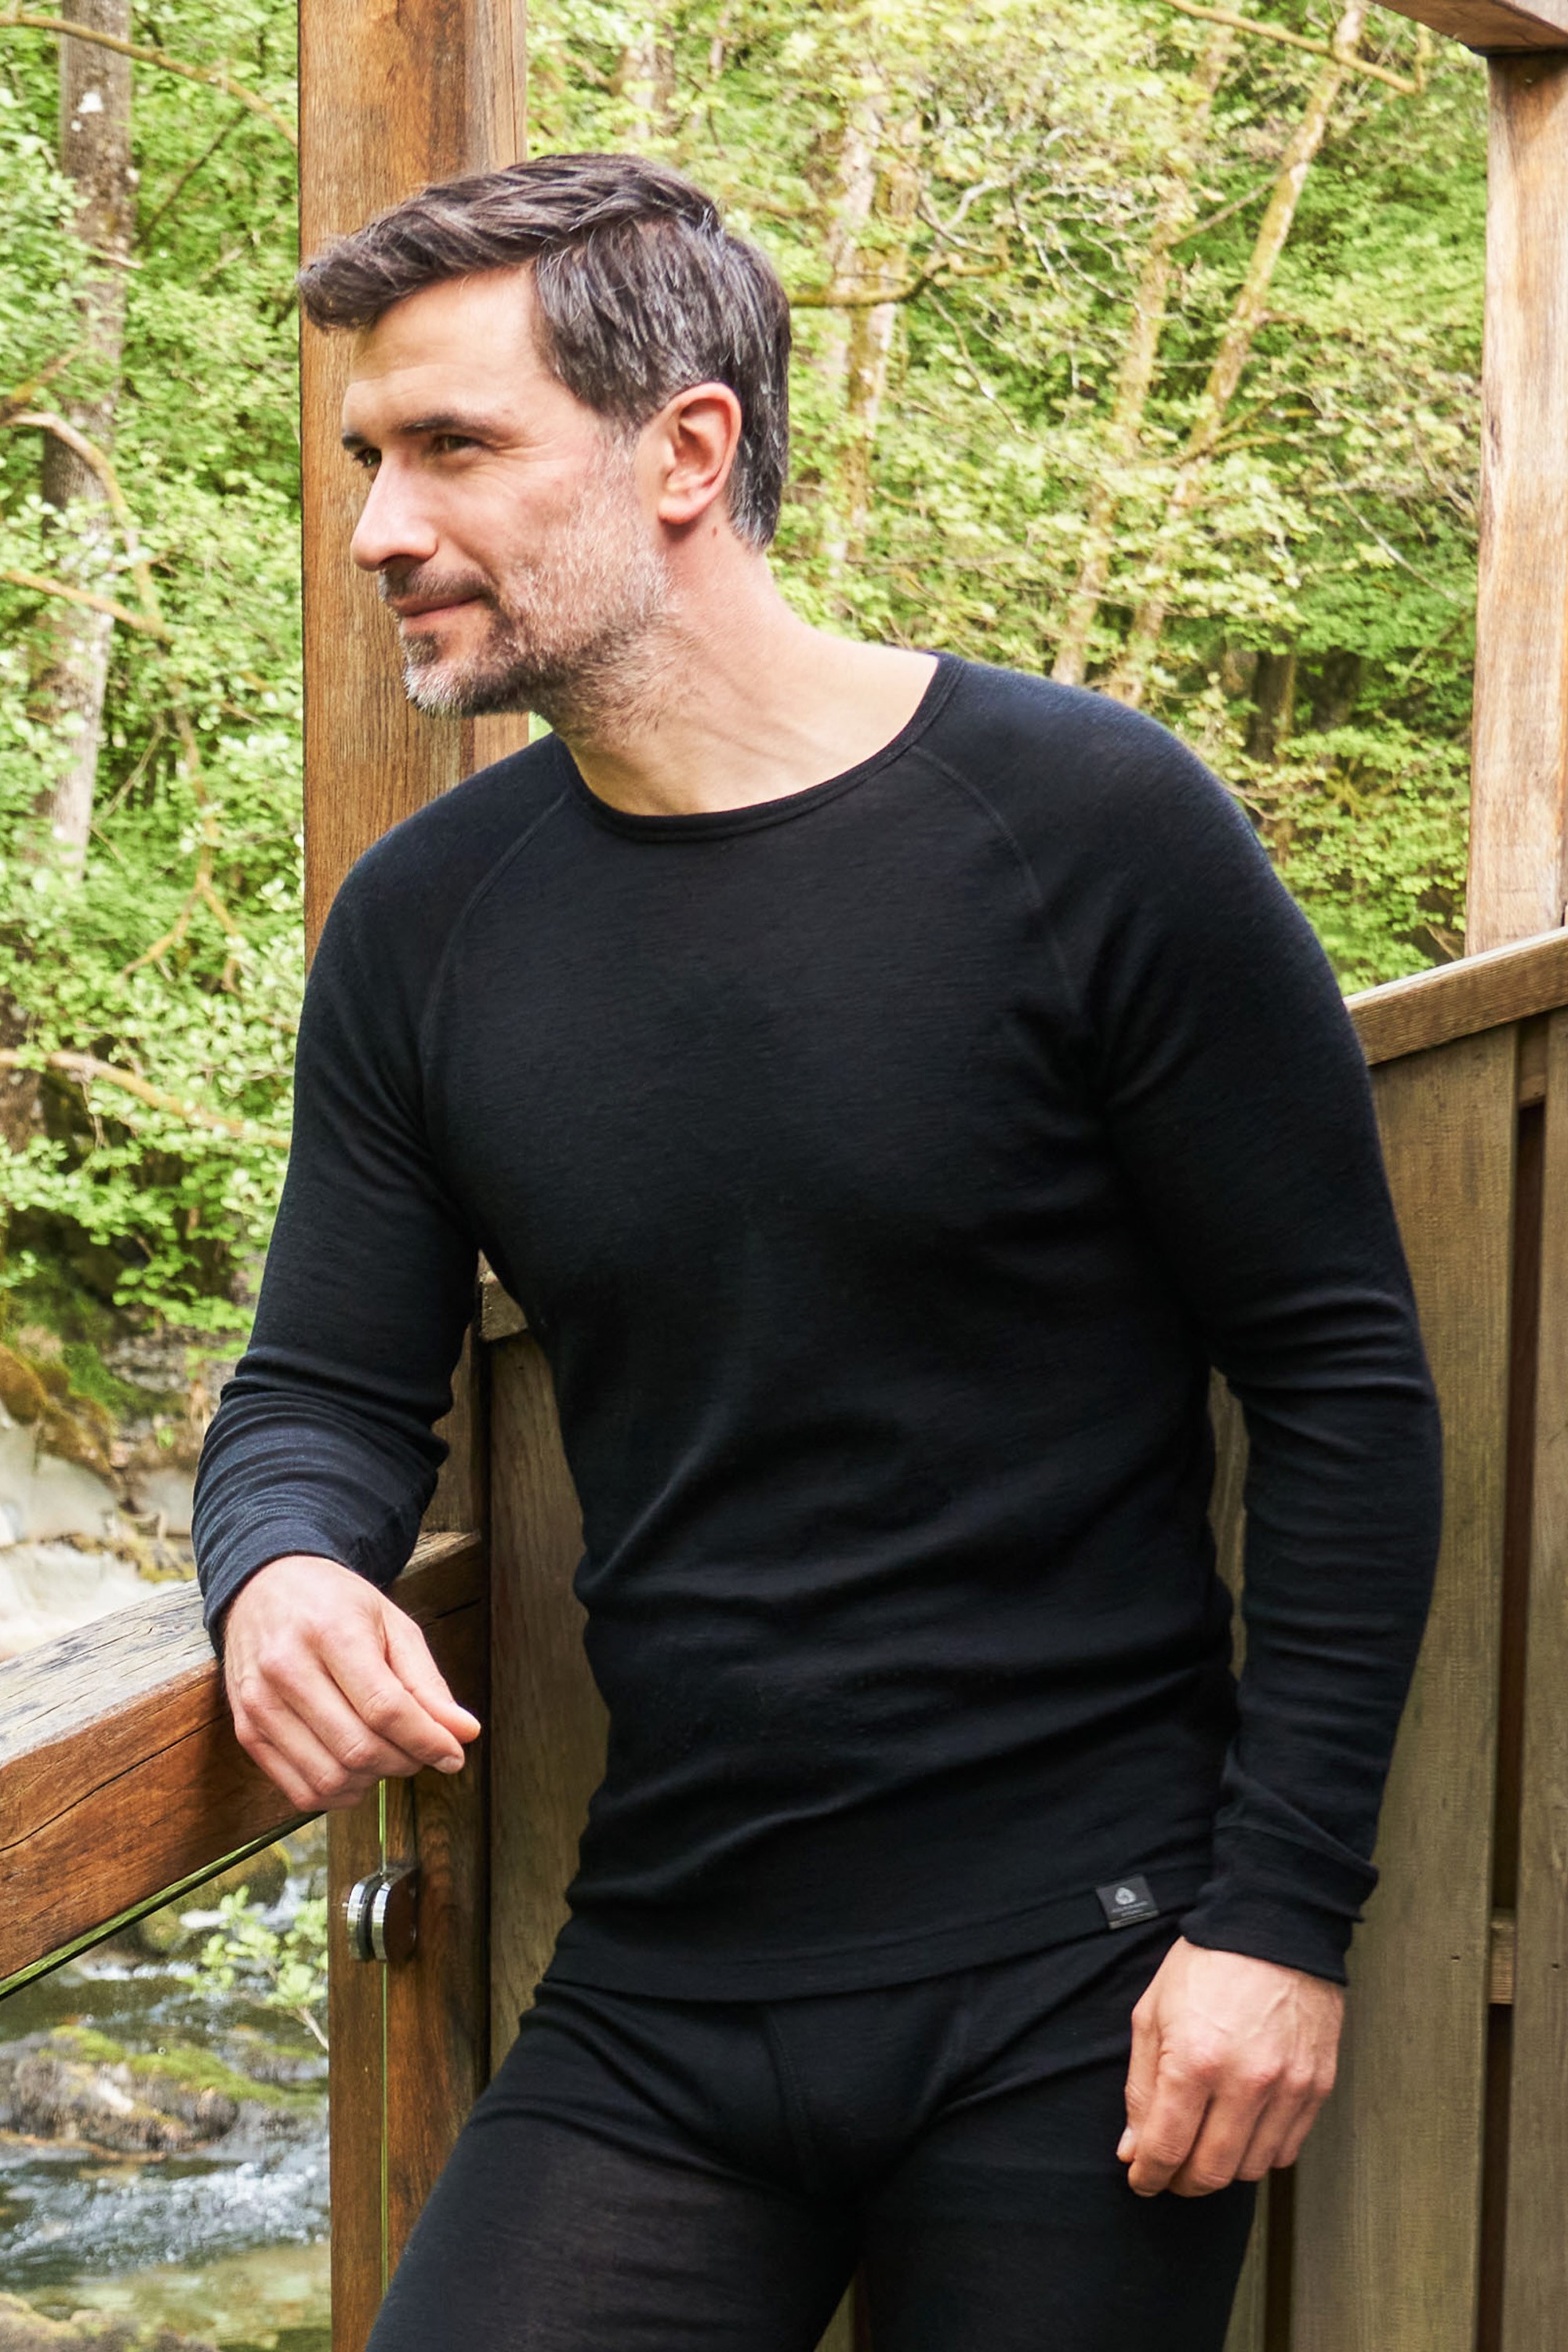 Mens Merino Wool Thermal Base Layer Shirt: Lightweight, Quick Dry,  Breathable, And Classic Crew Length For Sports And Casual Wear From Piao04,  $28.77